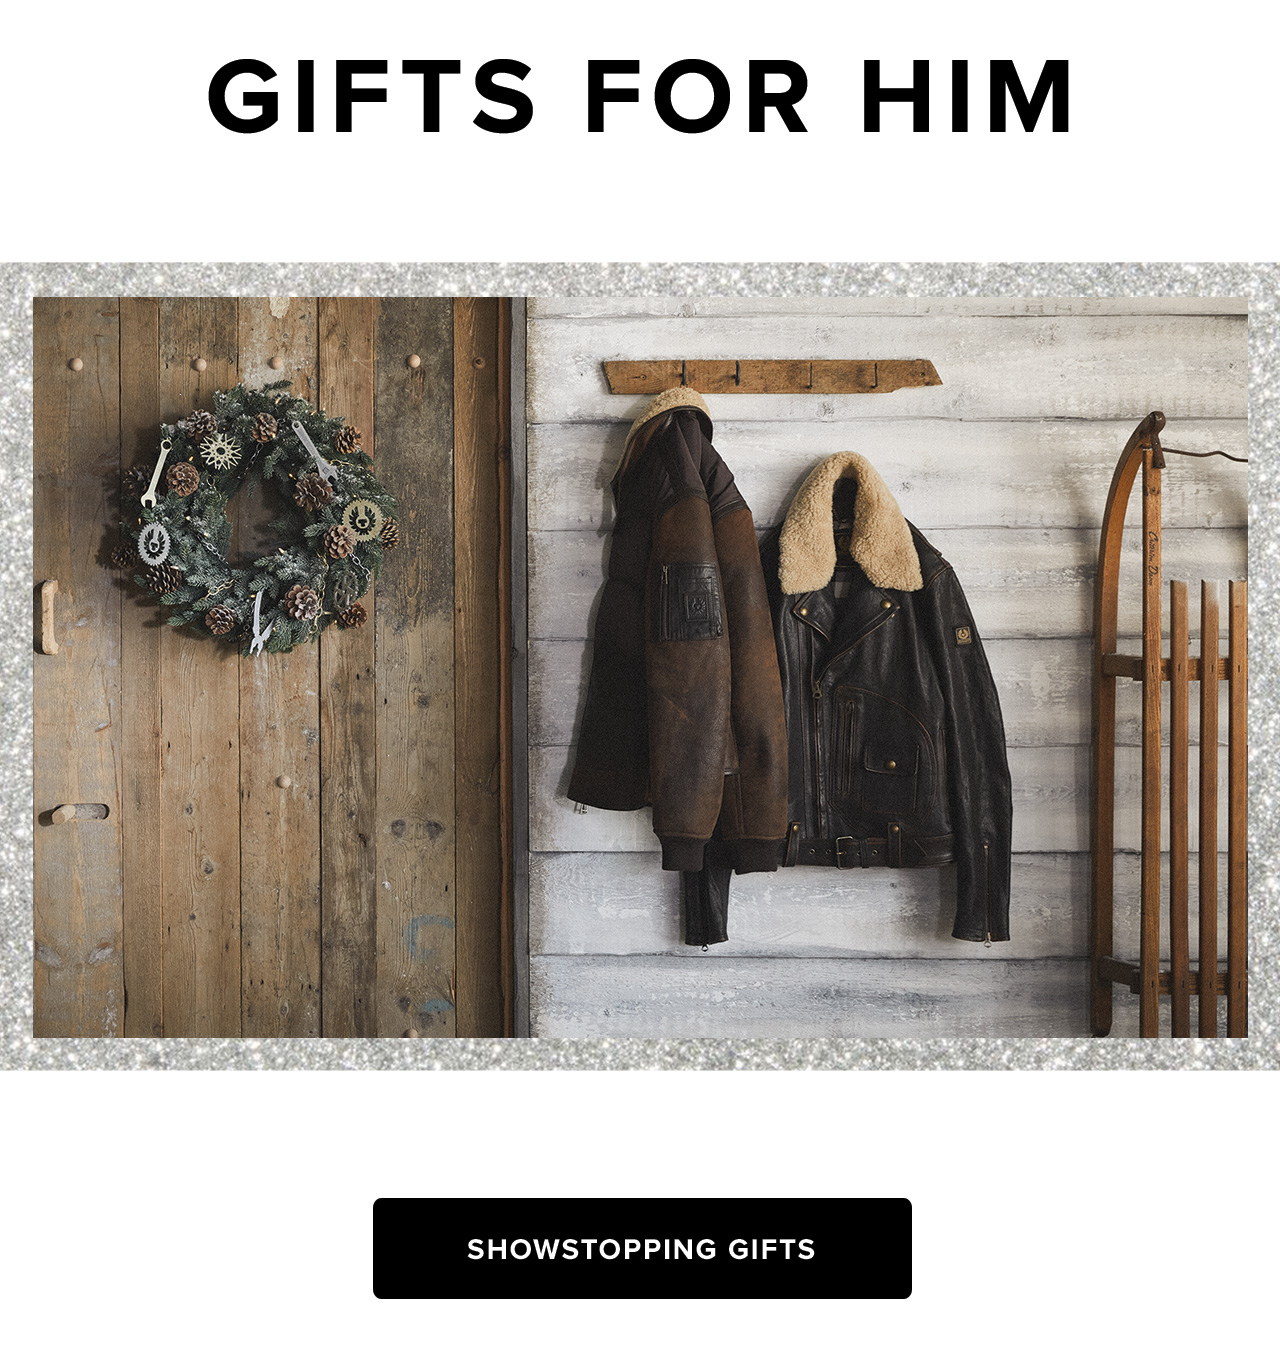 Showstopping Gifts